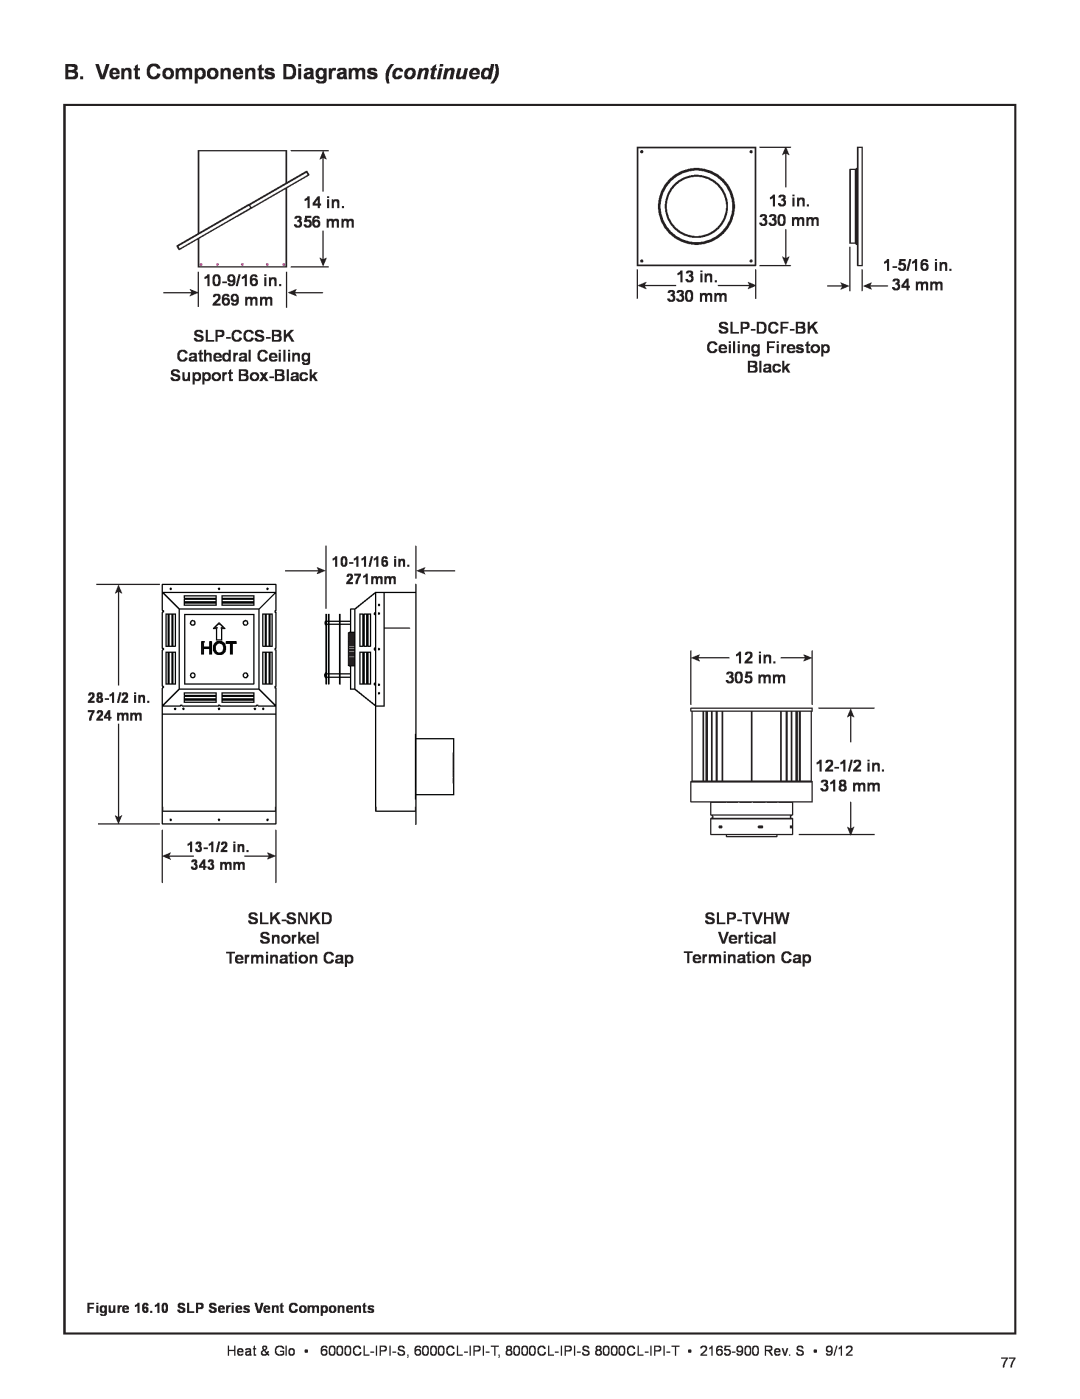 Heat & Glo LifeStyle 8000CL-IPI-T manual B. Vent Components Diagrams continued, 14 in 356 mm 10-9/16in 269 mm SLP-CCS-BK 